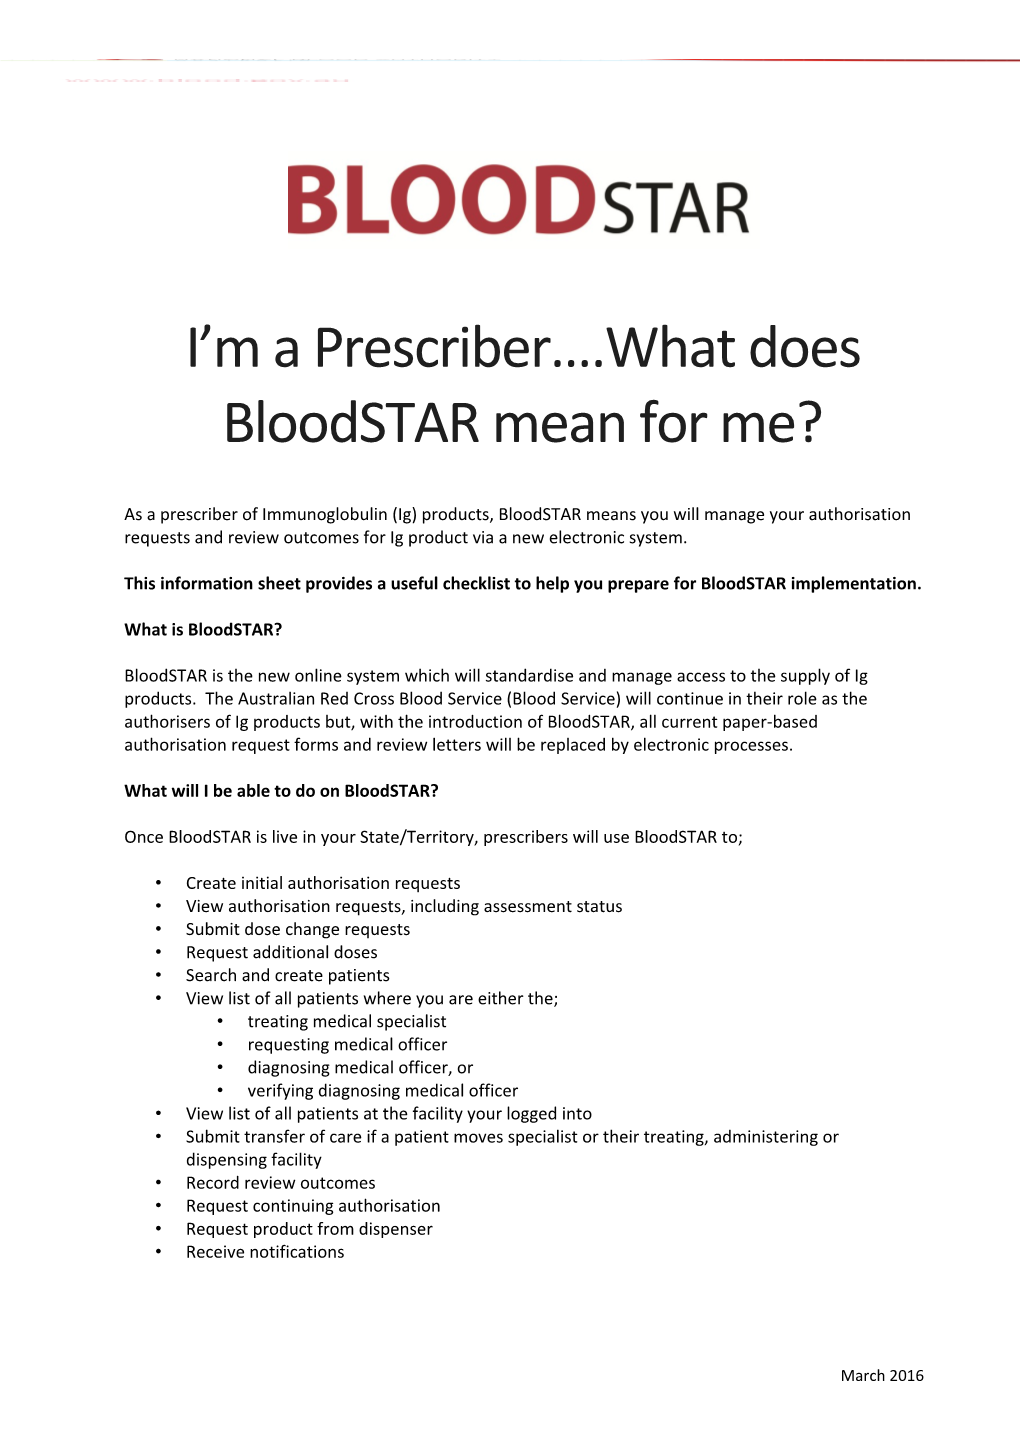 I M a Prescriber .What Does Bloodstar Mean for Me?